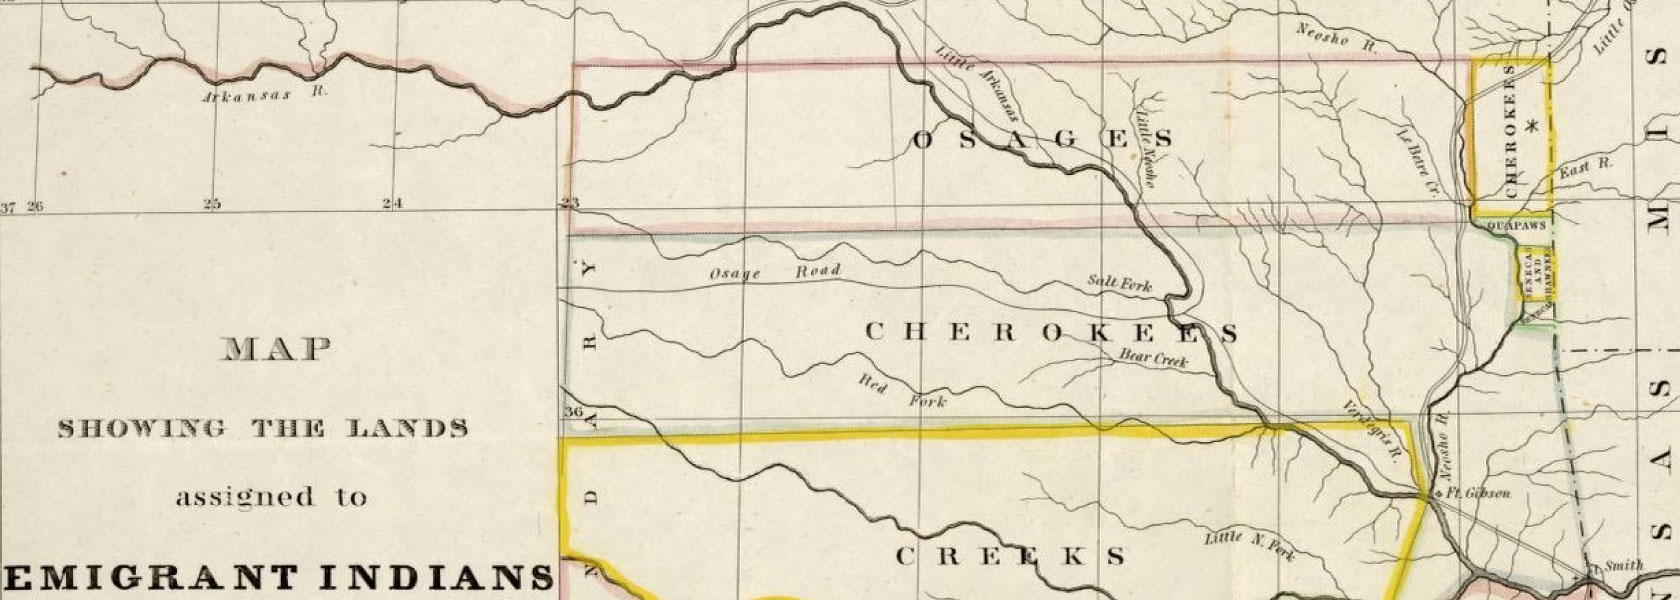 Map labeled "Map showing the lands assigned to emigrant Indians west of Arkansas & Missouri" showing lands designated for Osages, Cherokees, Creeks, Seminoles, and Choctaws.